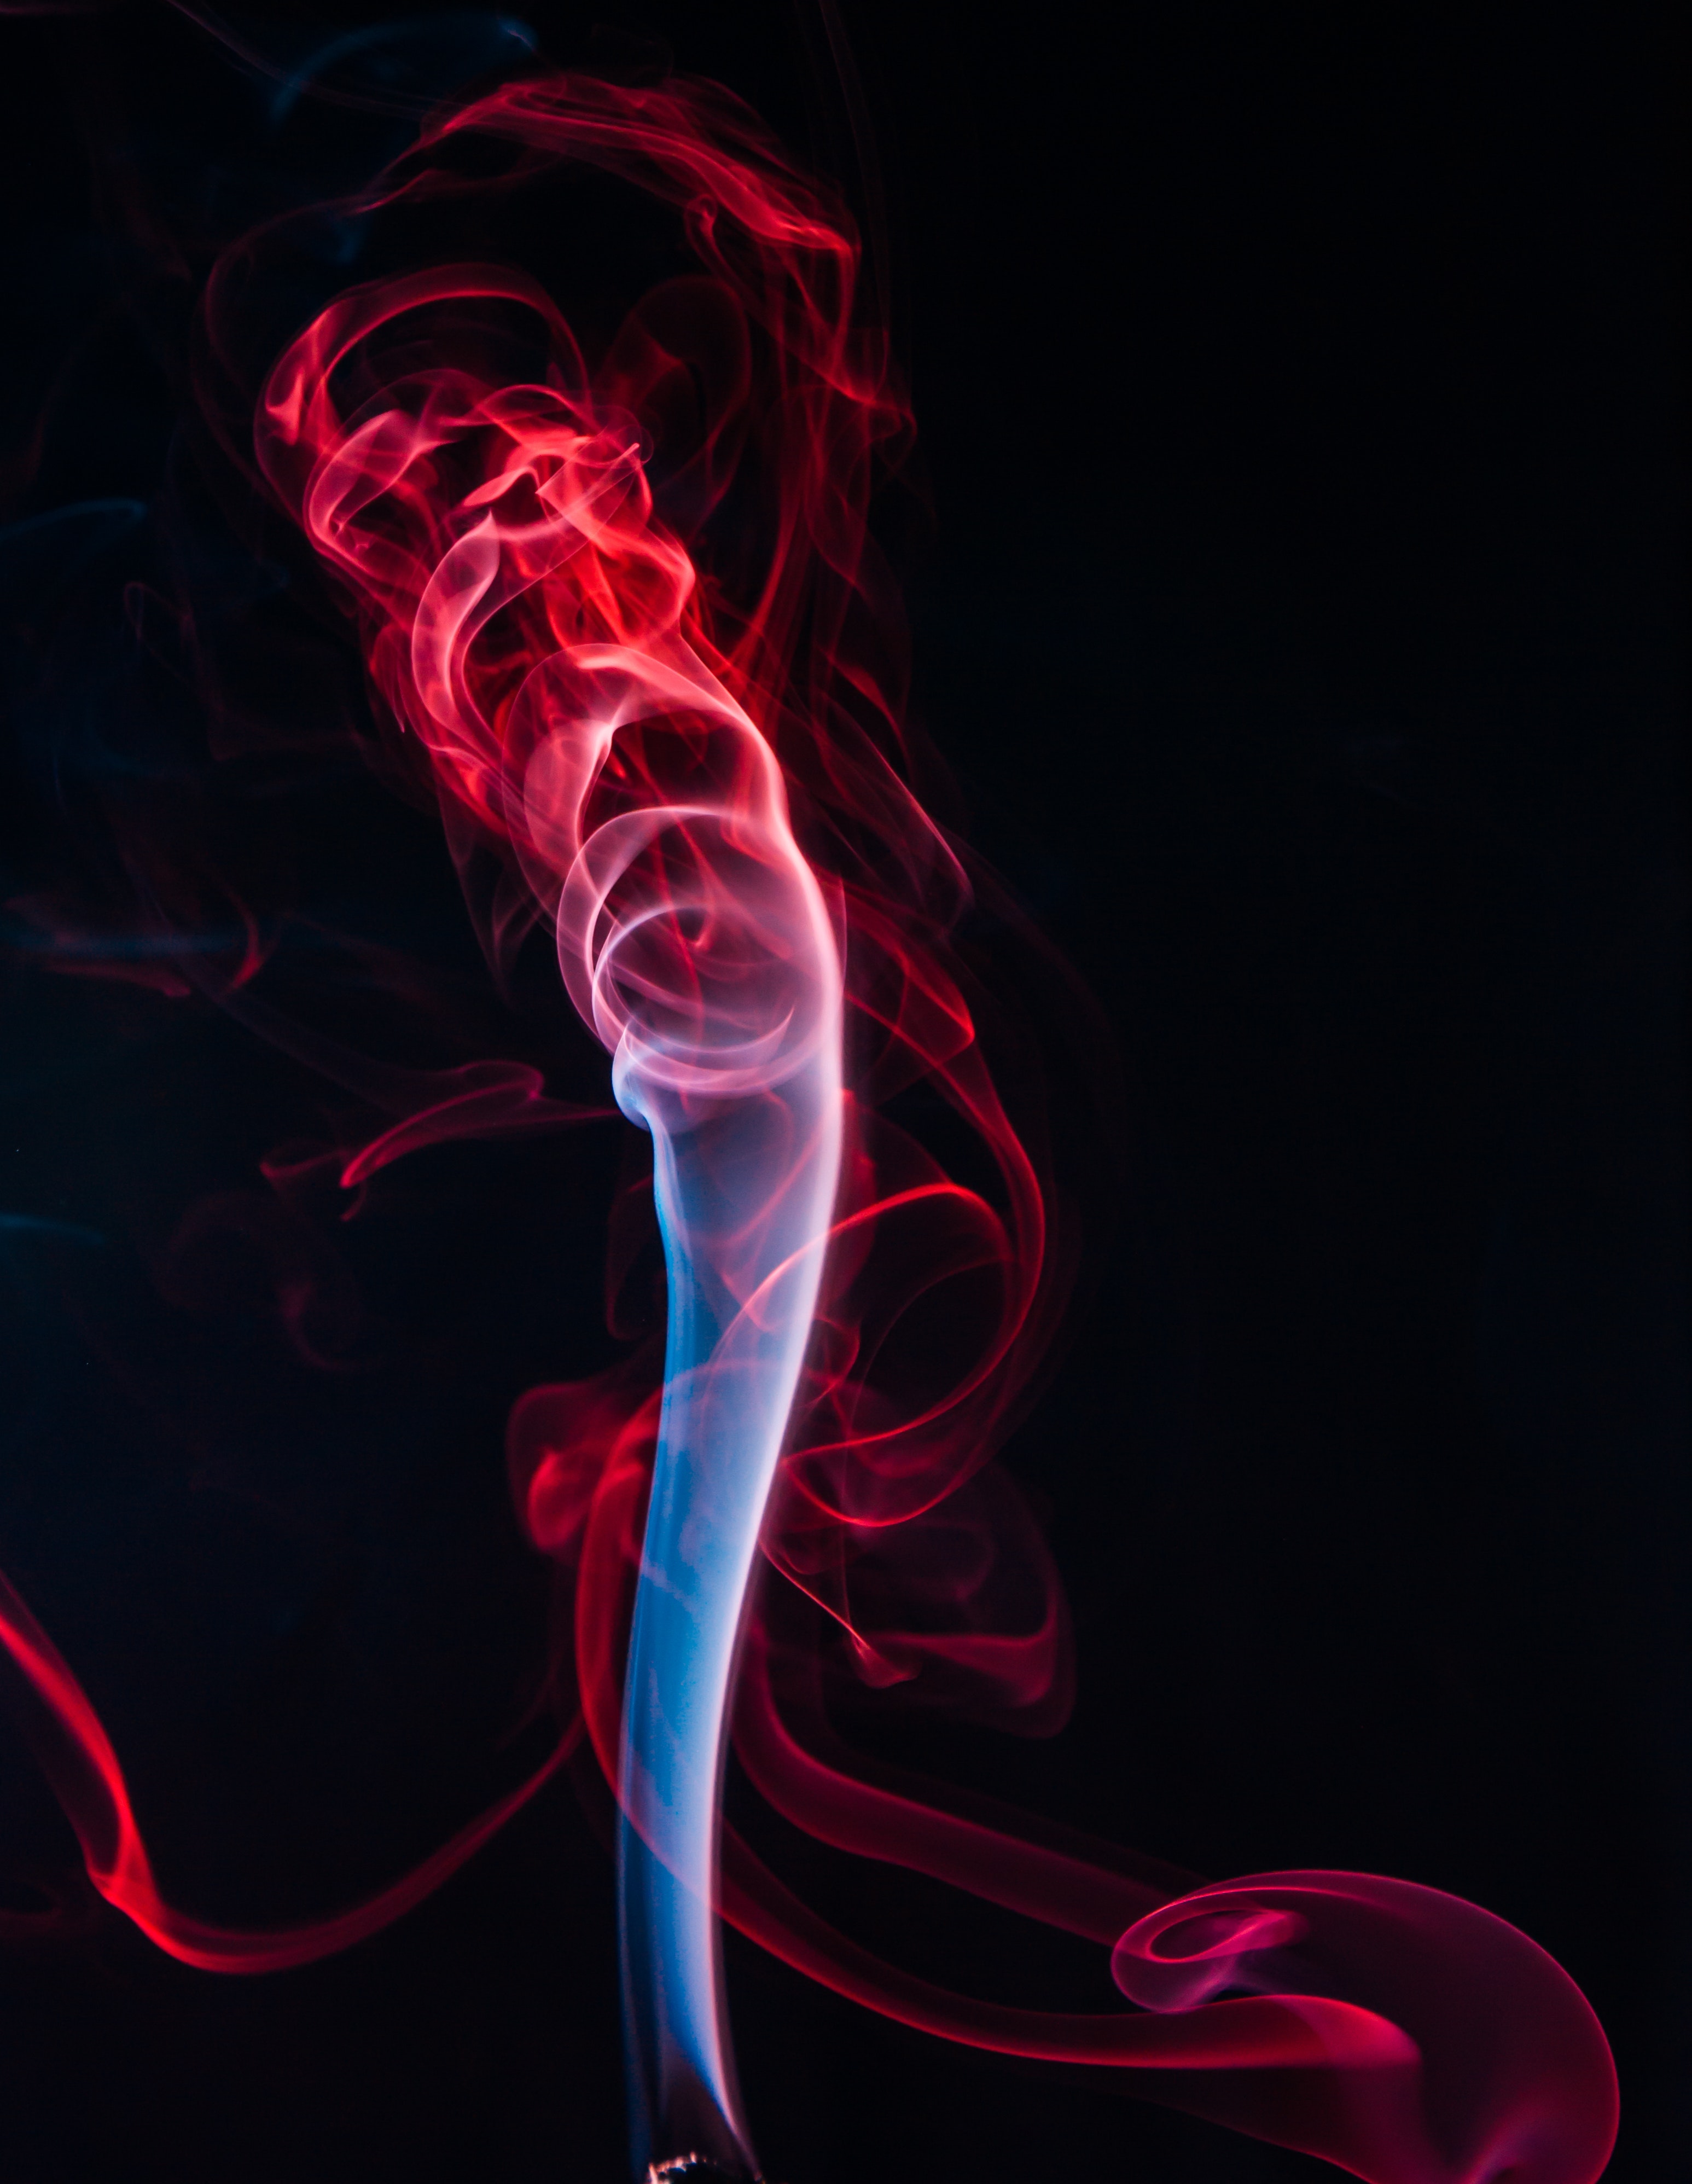 black, clots, coloured smoke, abstract, red, colored smoke, shroud wallpaper for mobile